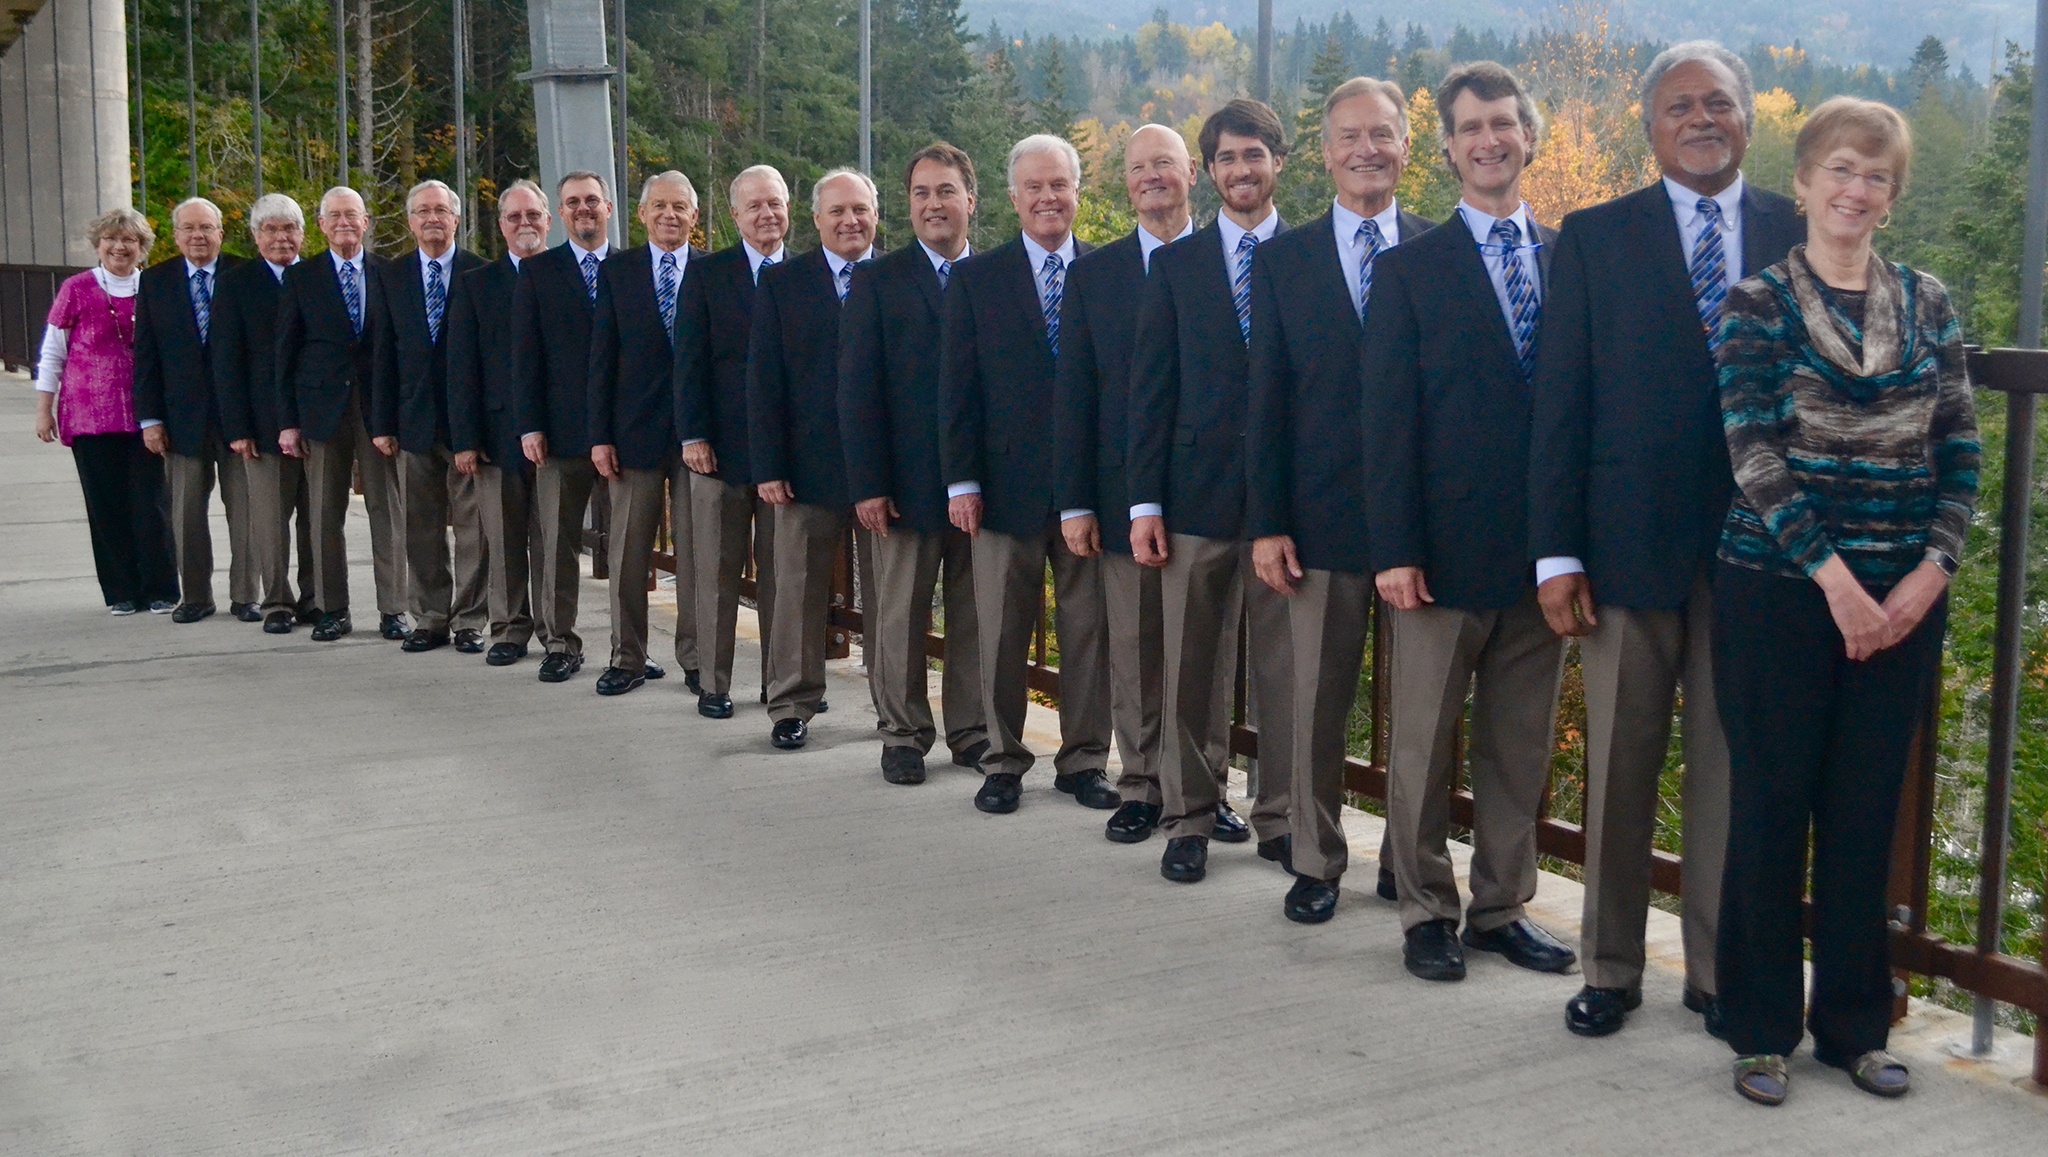 The NorthWest Women’s Chorale will present the Peninsula Men’s Gospel Singers in concert on Nov. 18. Submitted photo